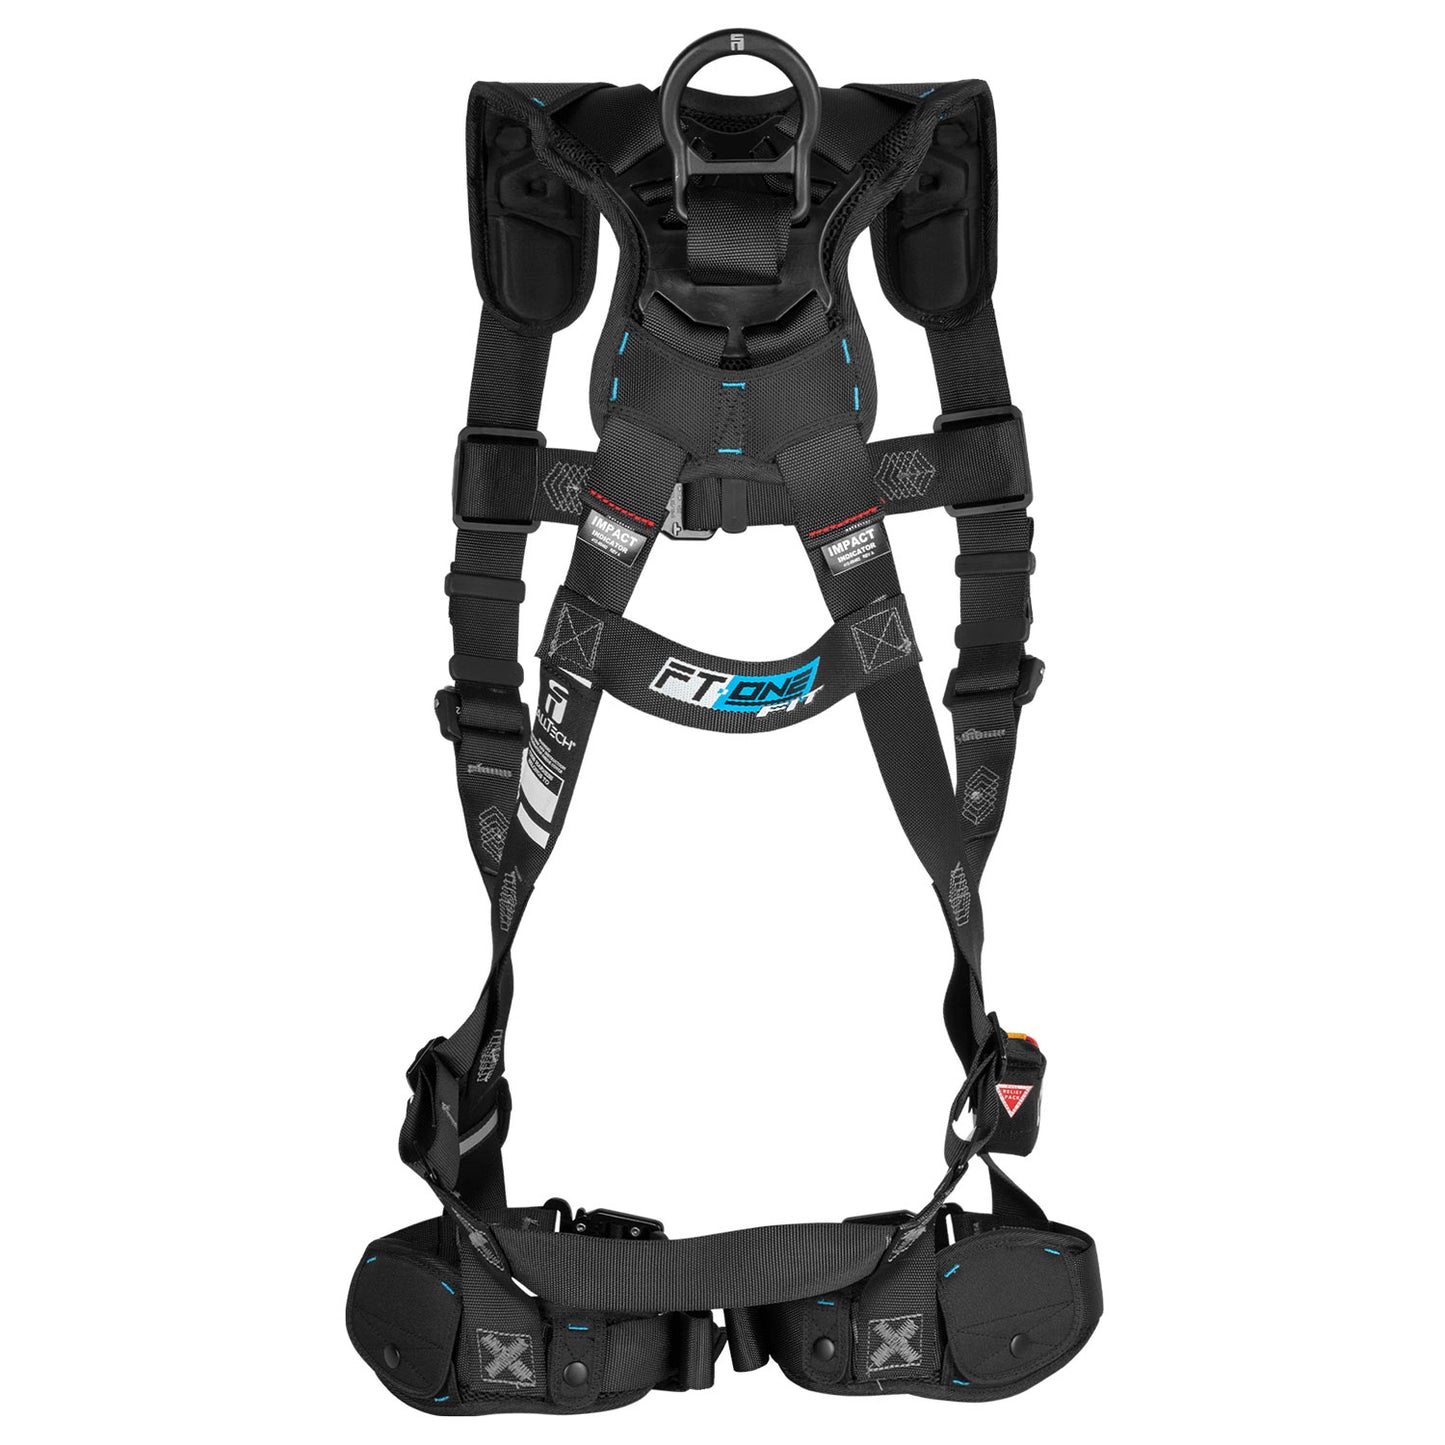 FallTech FT-One Fit Women's Safety Harness w/ Trauma Straps | Non-Belted | XL | 8129QCXL